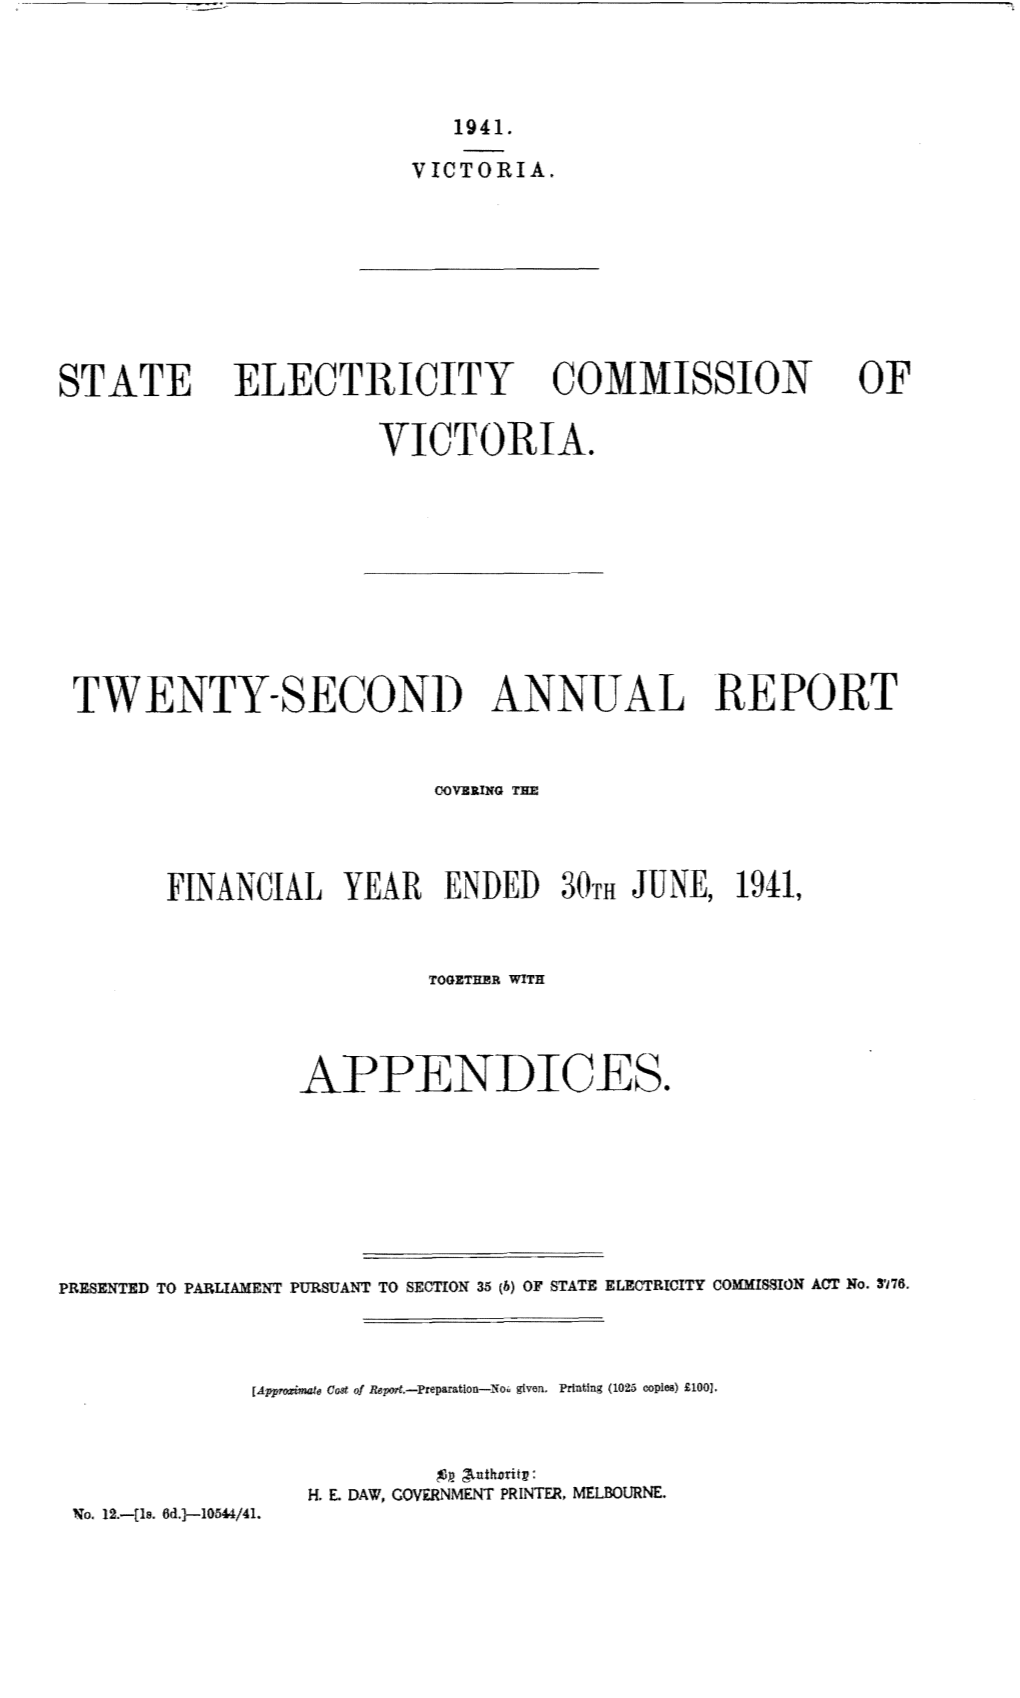 State Electricity Com~Iission of Victoria